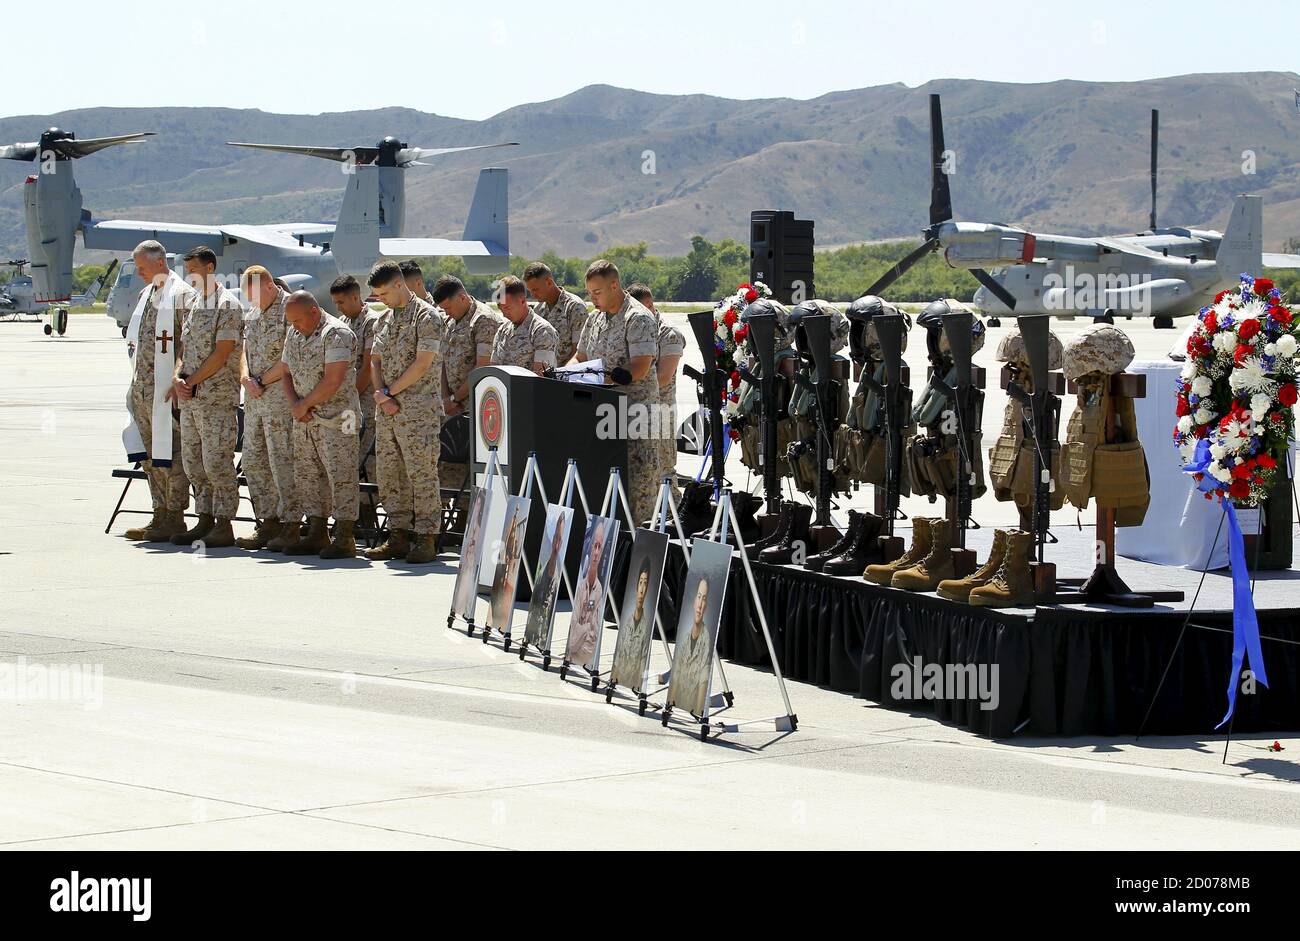 A moment of silence is given to marines from the 3rd Marine Aircraft Wing, who lost their lives in the crash of their military helicopter while coming to the aid of earthquake victims in Nepal, during a memorial service at Camp Pendleton, California June 3, 2015. REUTERS/Mike Blake Stock Photo